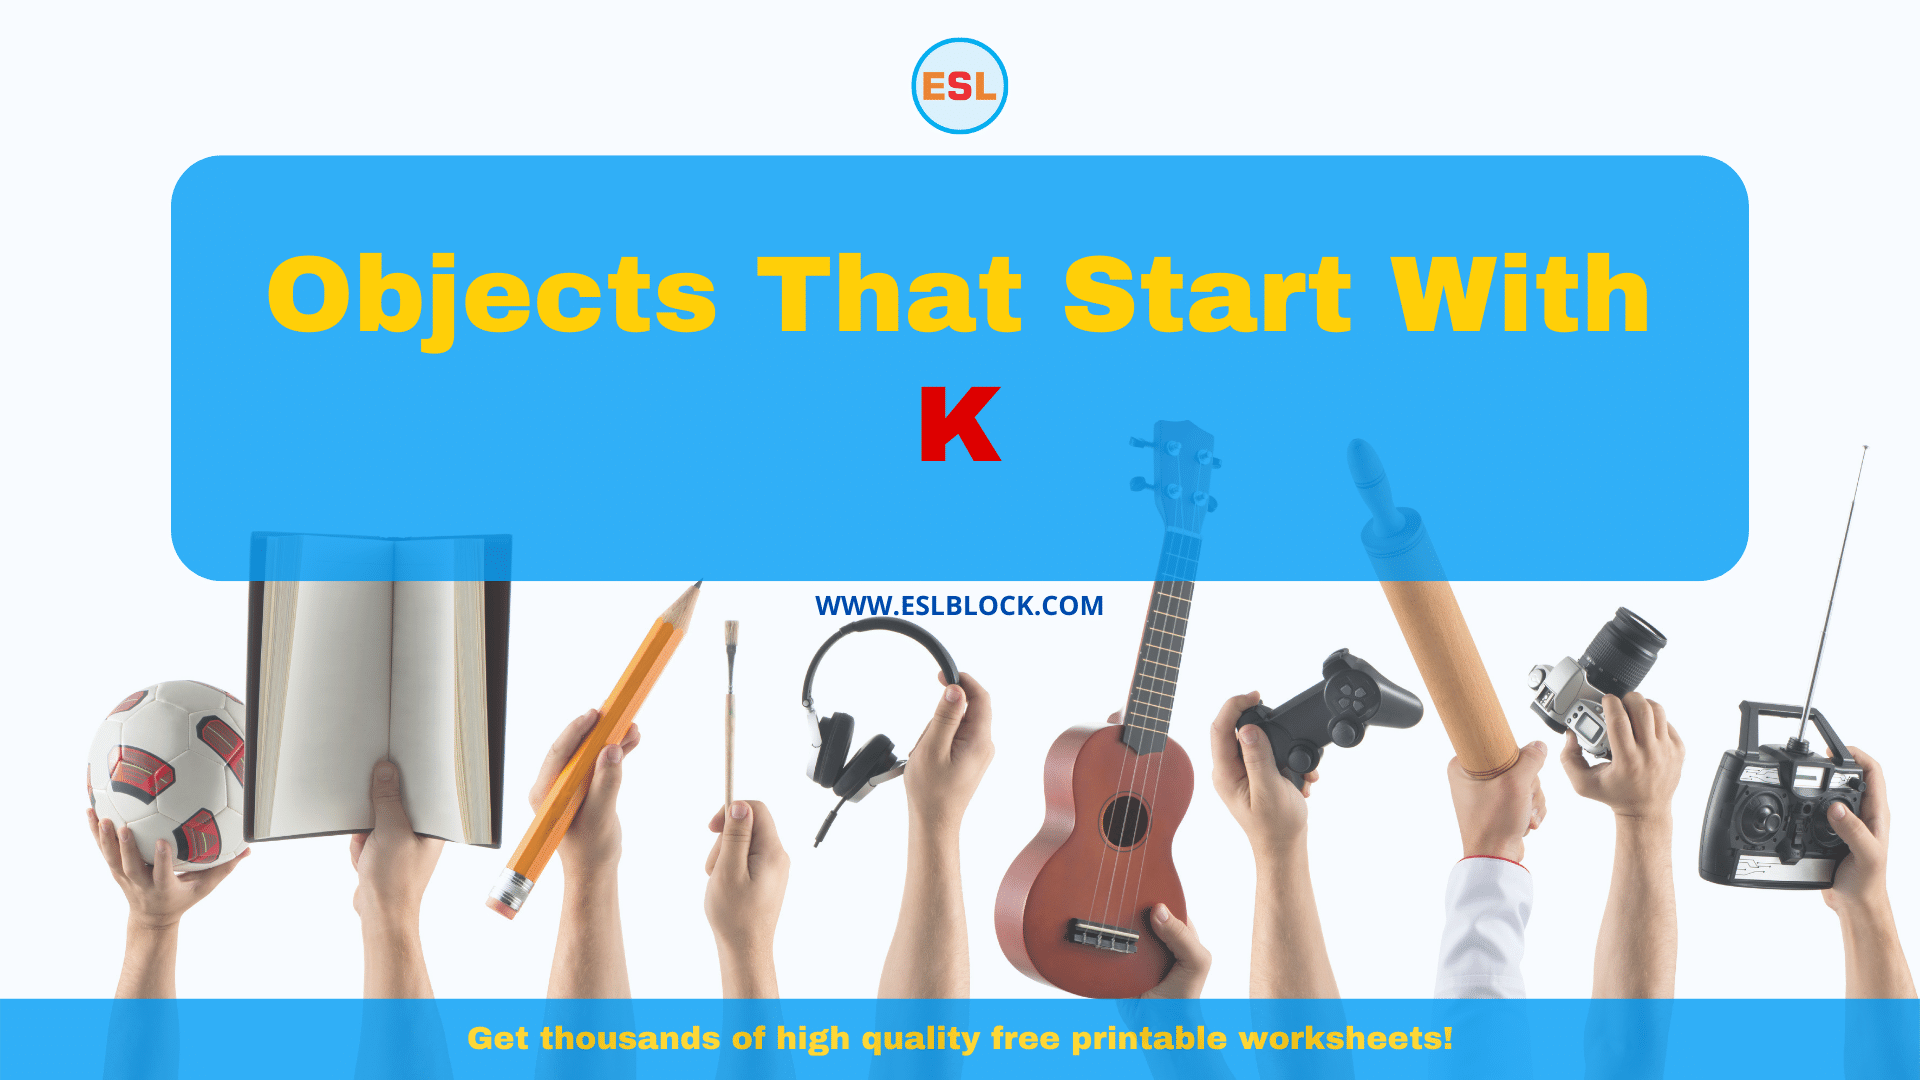 5 Letter Objects Starting With K, English, English Nouns, English Vocabulary, English Words, K Objects, K Objects in English, K Objects Names, List of Objects That Start With K, Nouns, Objects List, Objects That Start With K, Things Names, Vocabulary